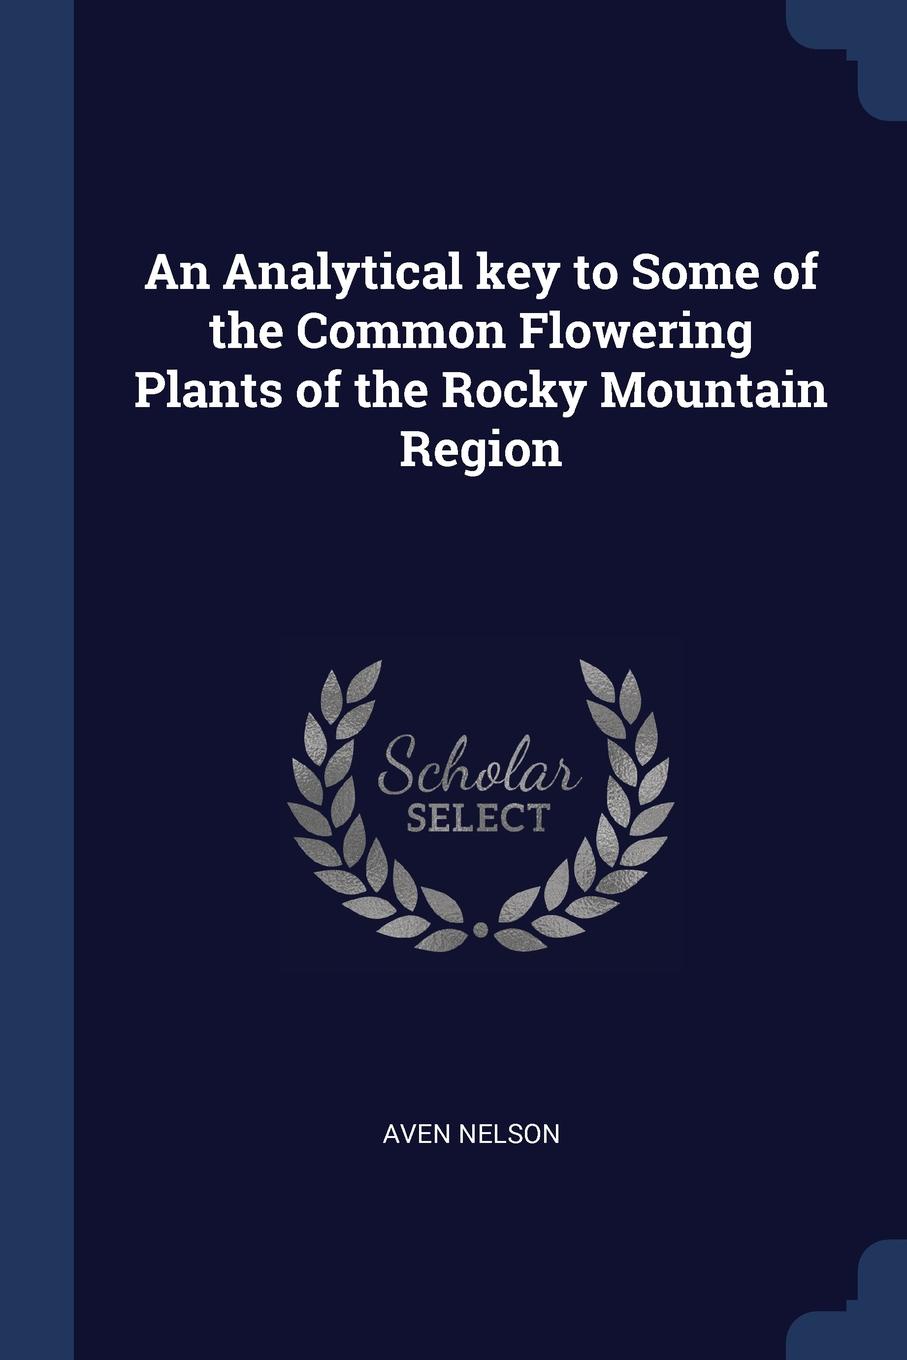 An Analytical key to Some of the Common Flowering Plants of the Rocky Mountain Region